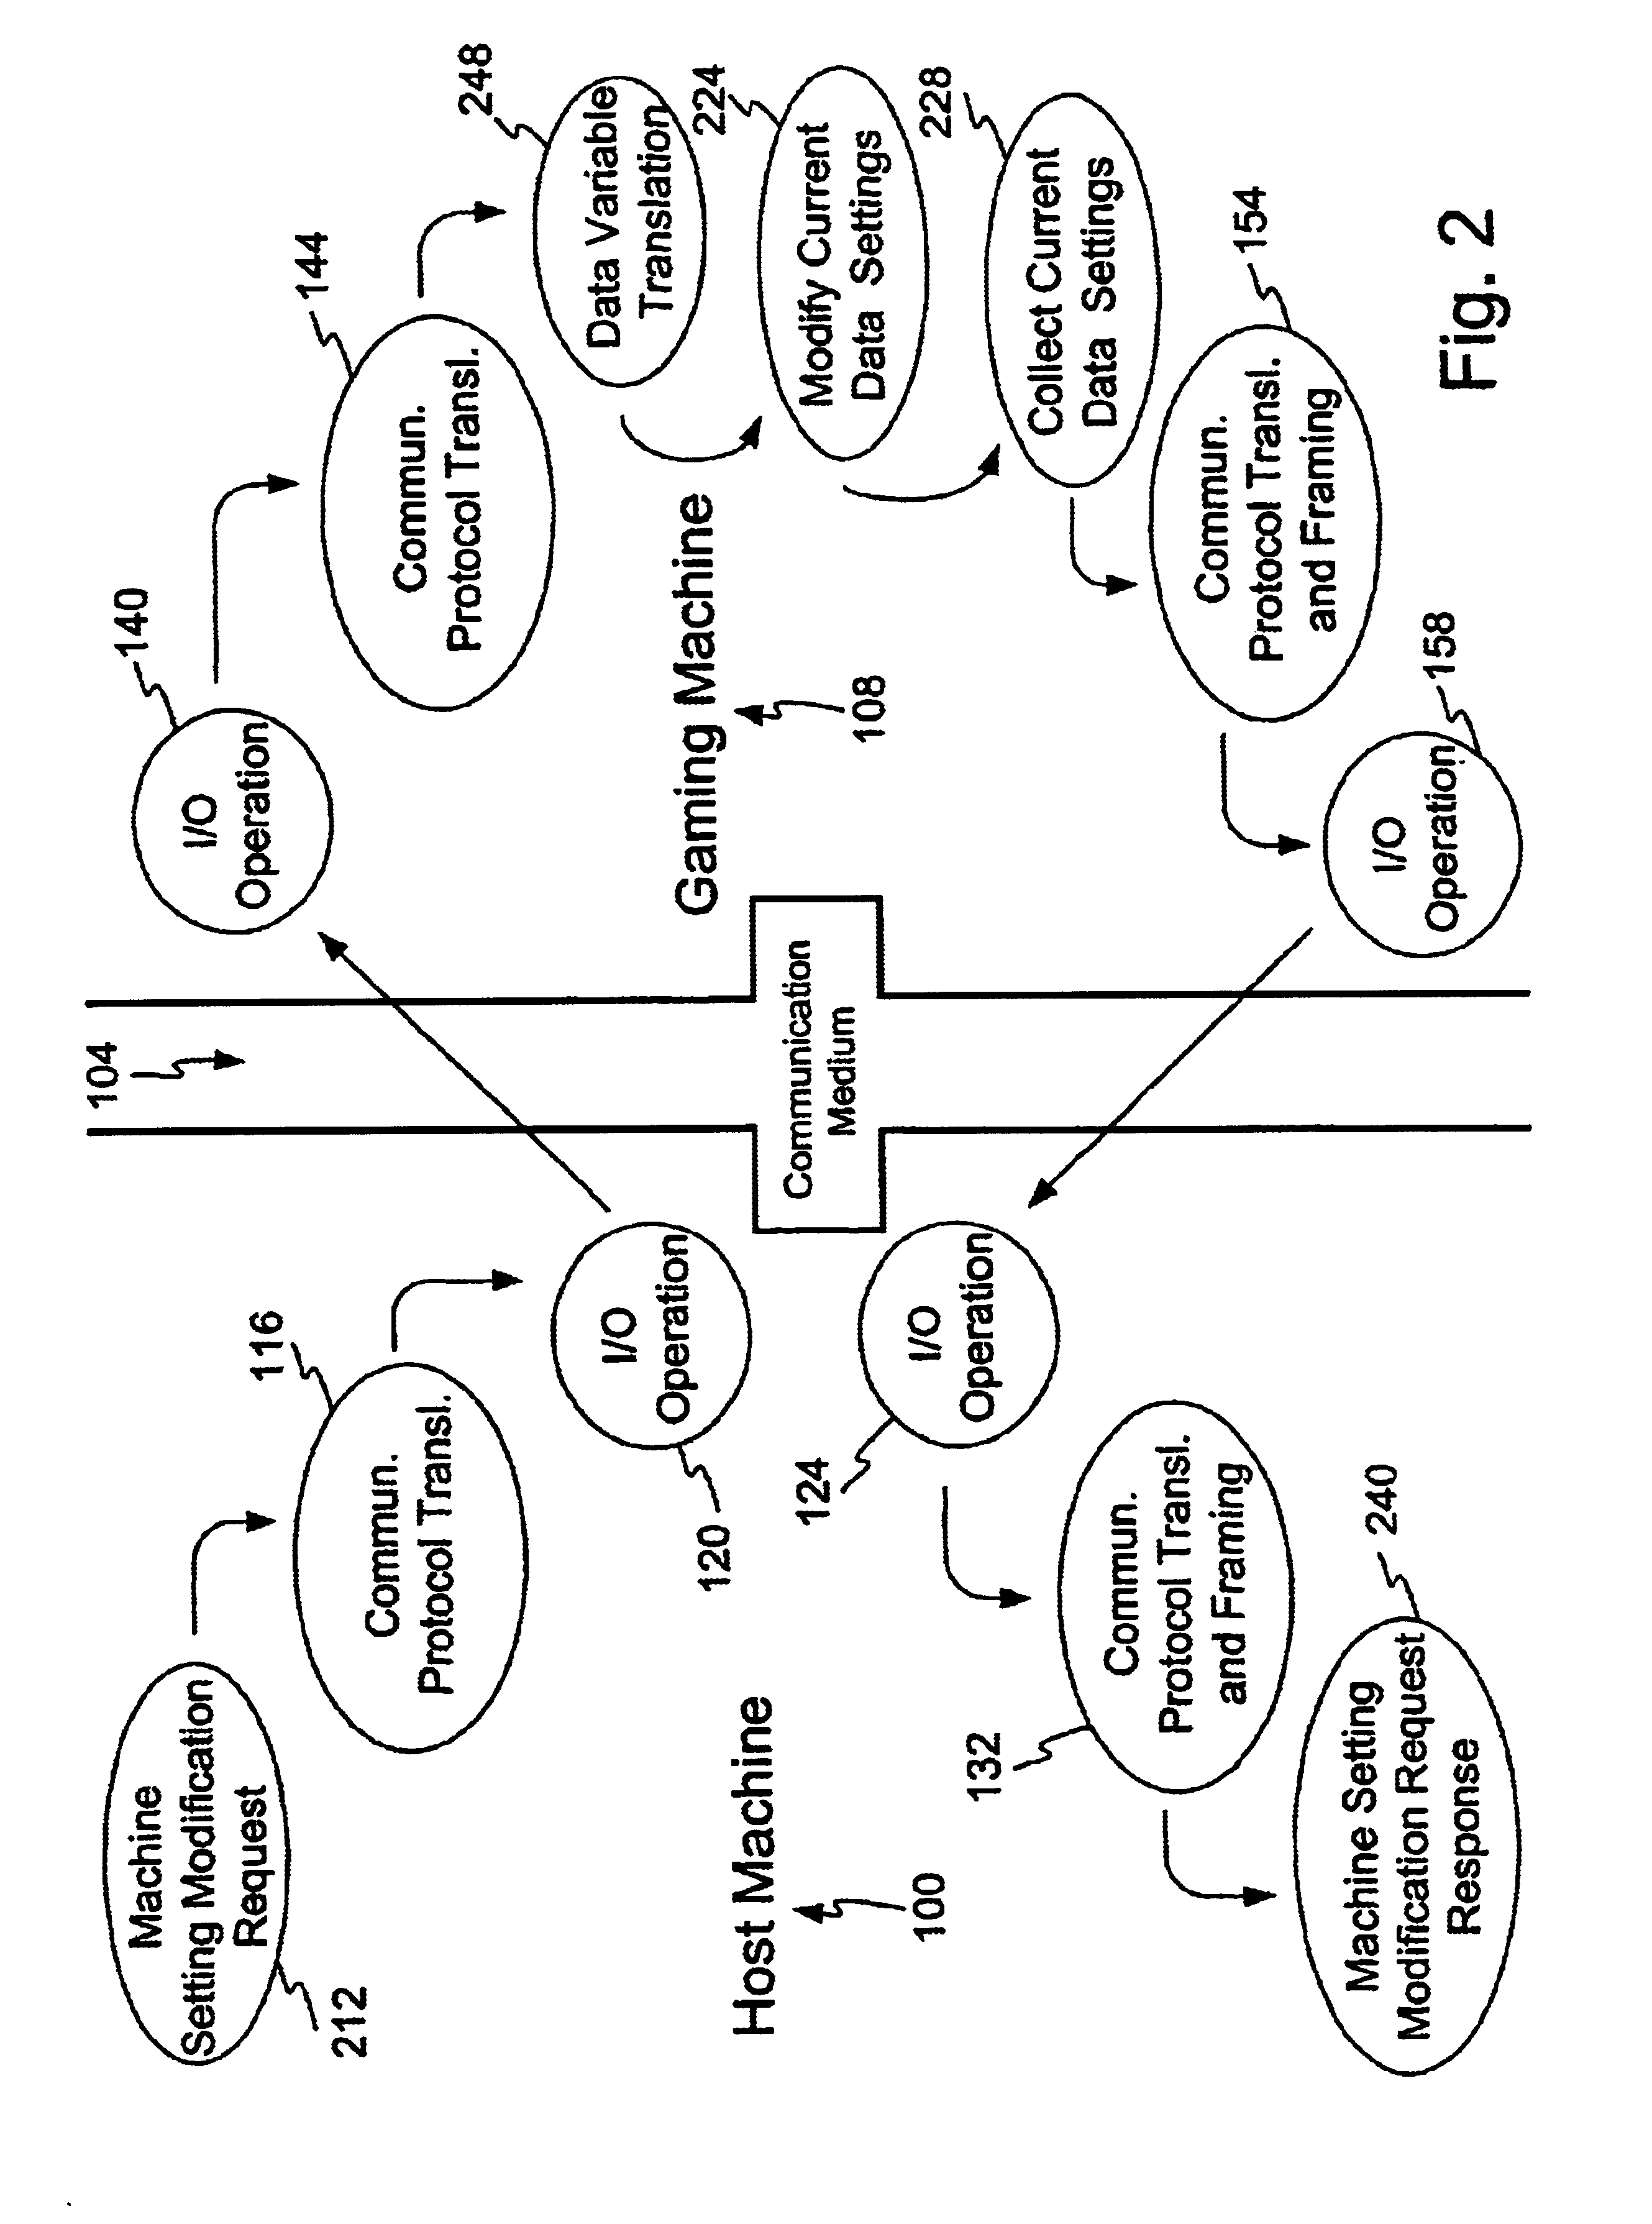 Communication protocol for gaming system configuration